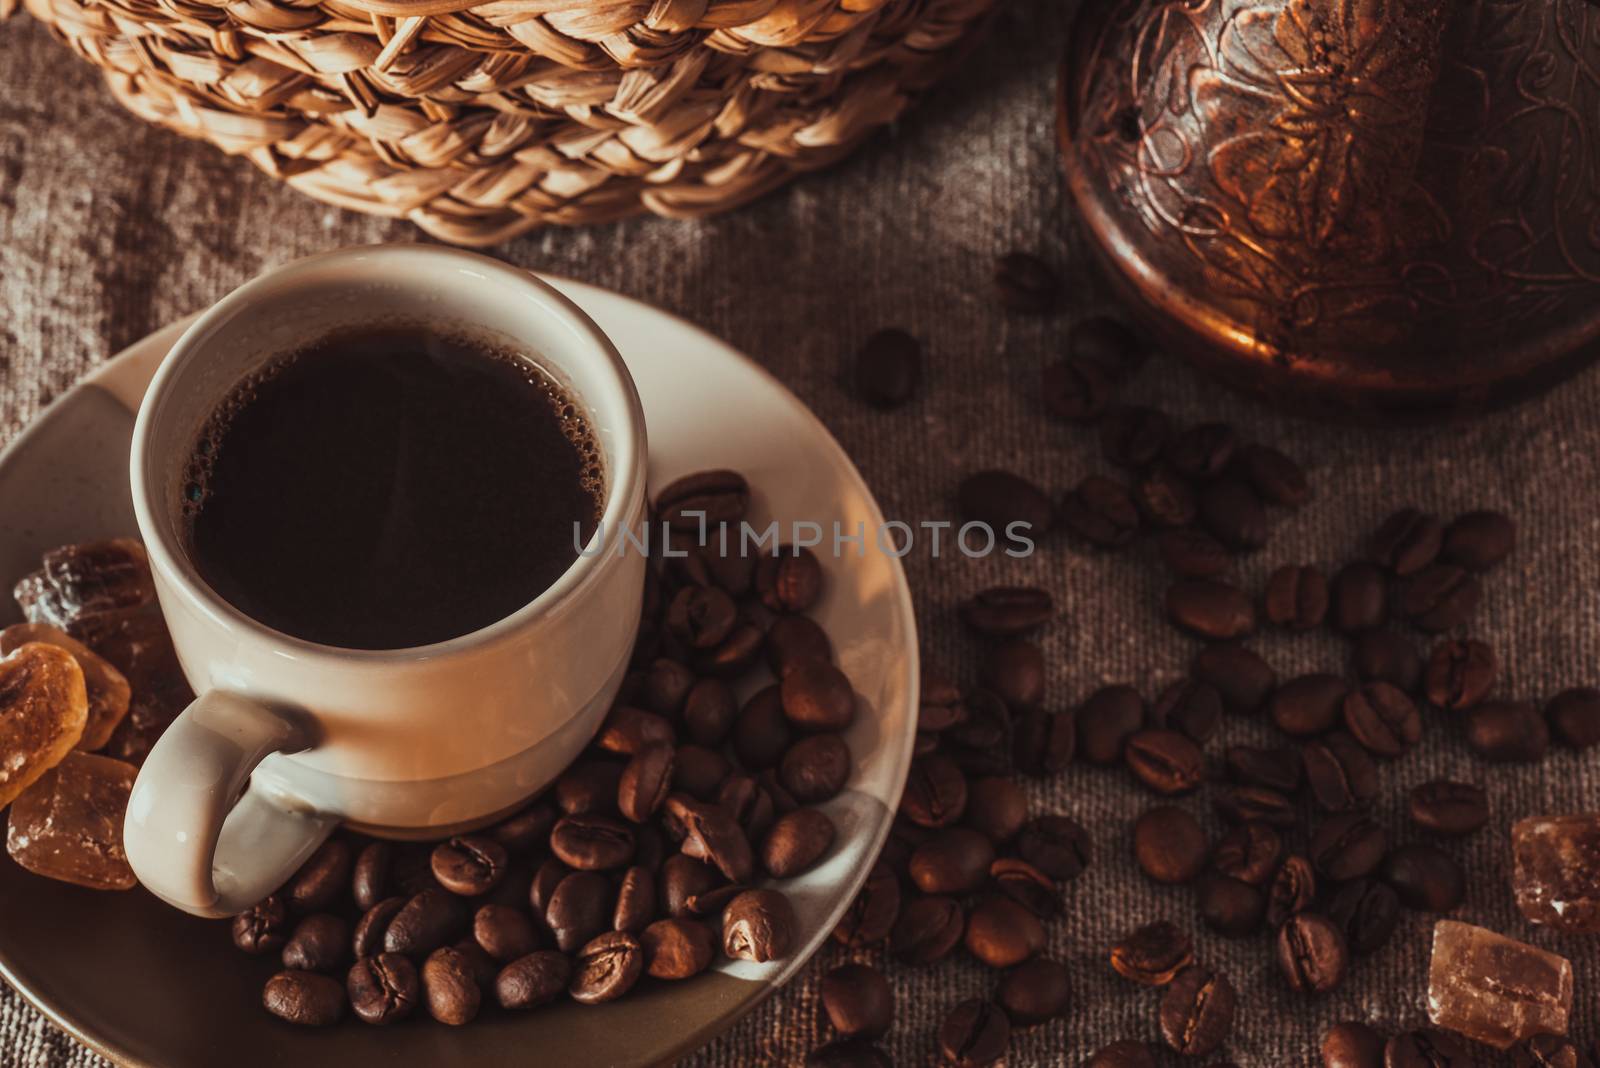 Cup of coffee on textile with beans, dark candy sugar, pots, basket and cake by Seva_blsv